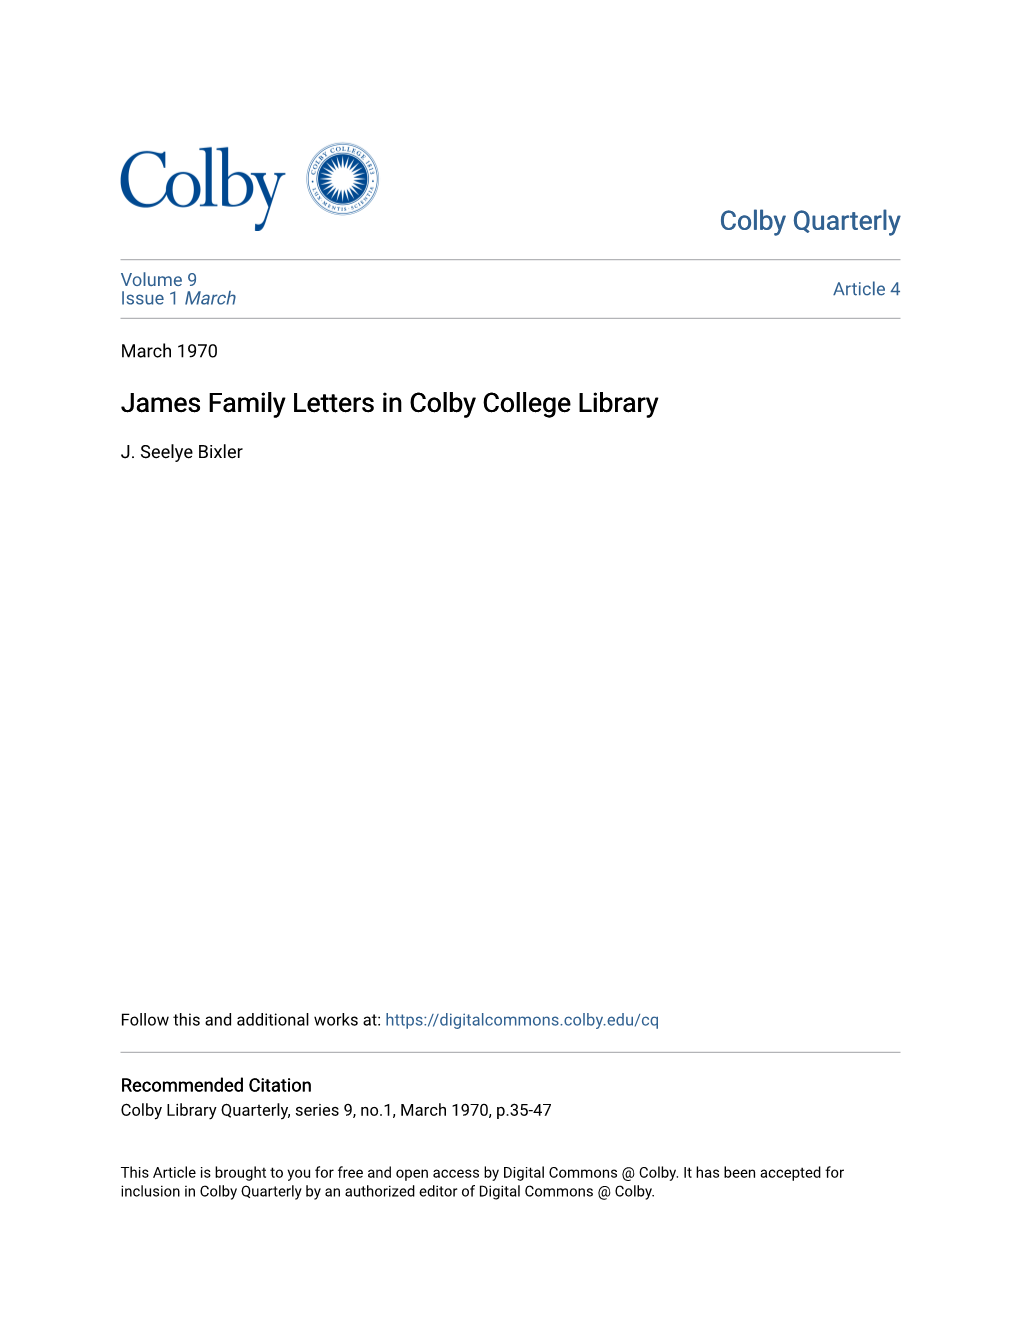 James Family Letters in Colby College Library